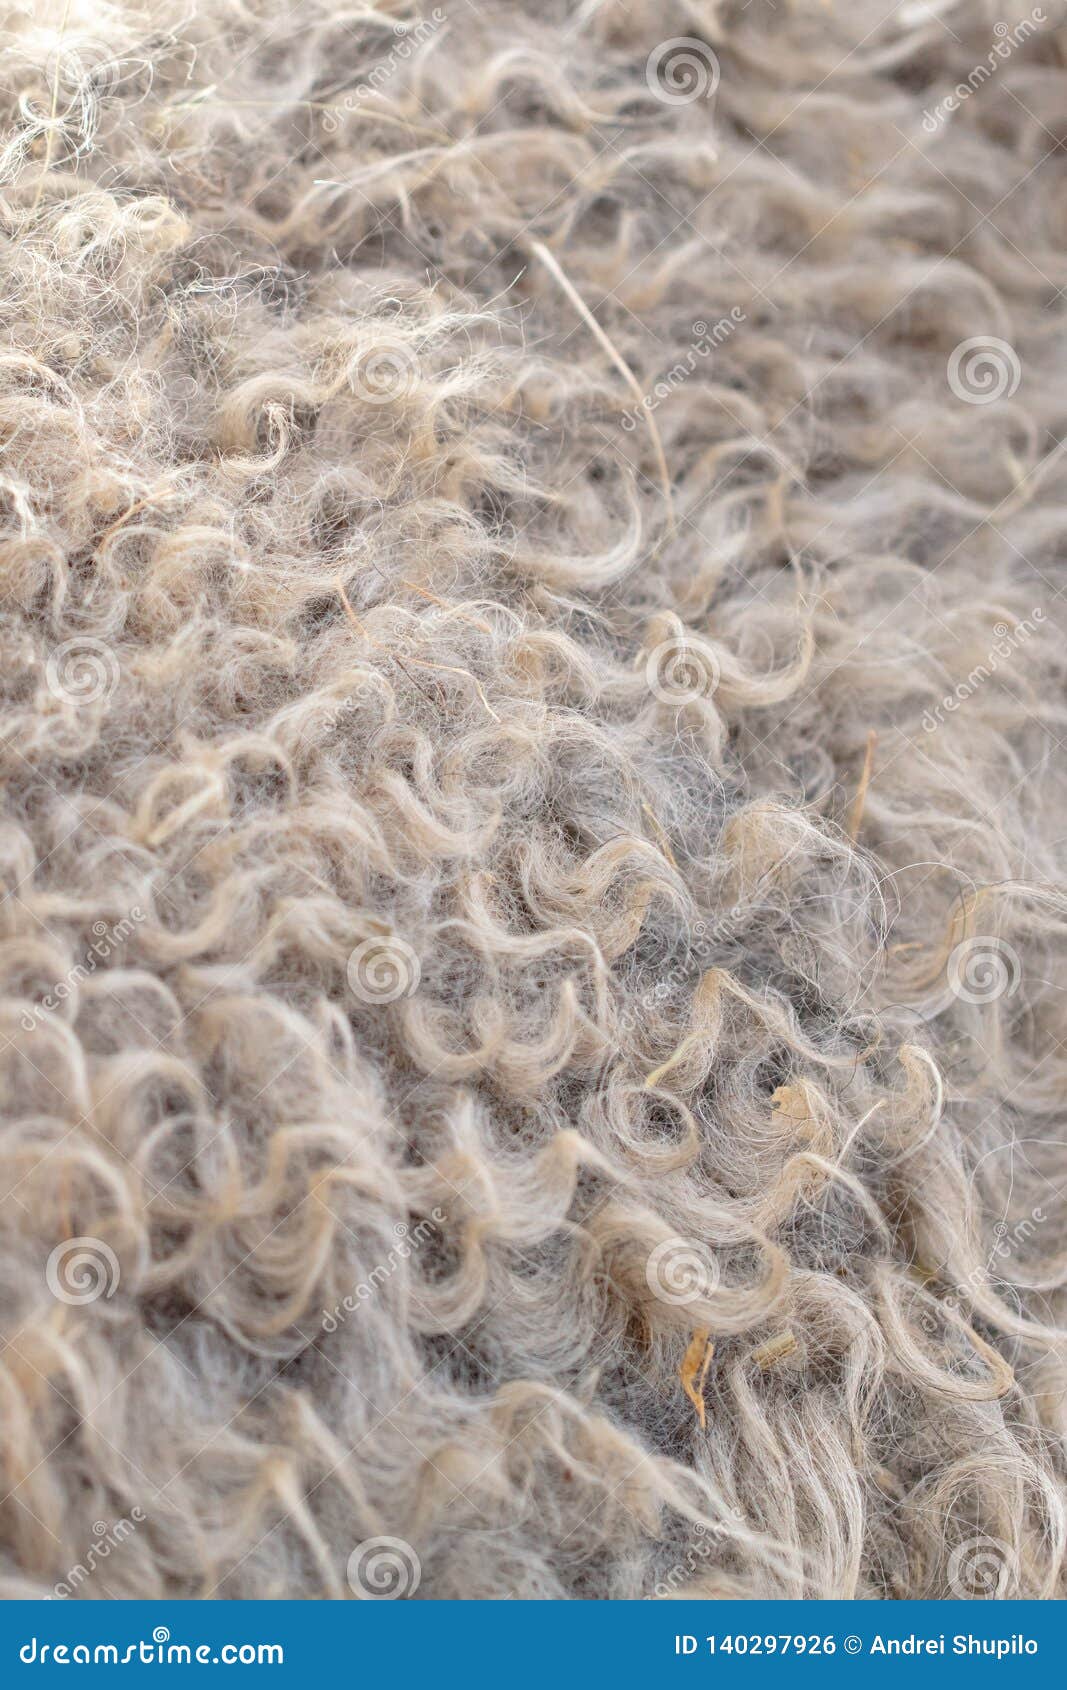 Sheep Wool As Abstract Background Stock Photo Image Of